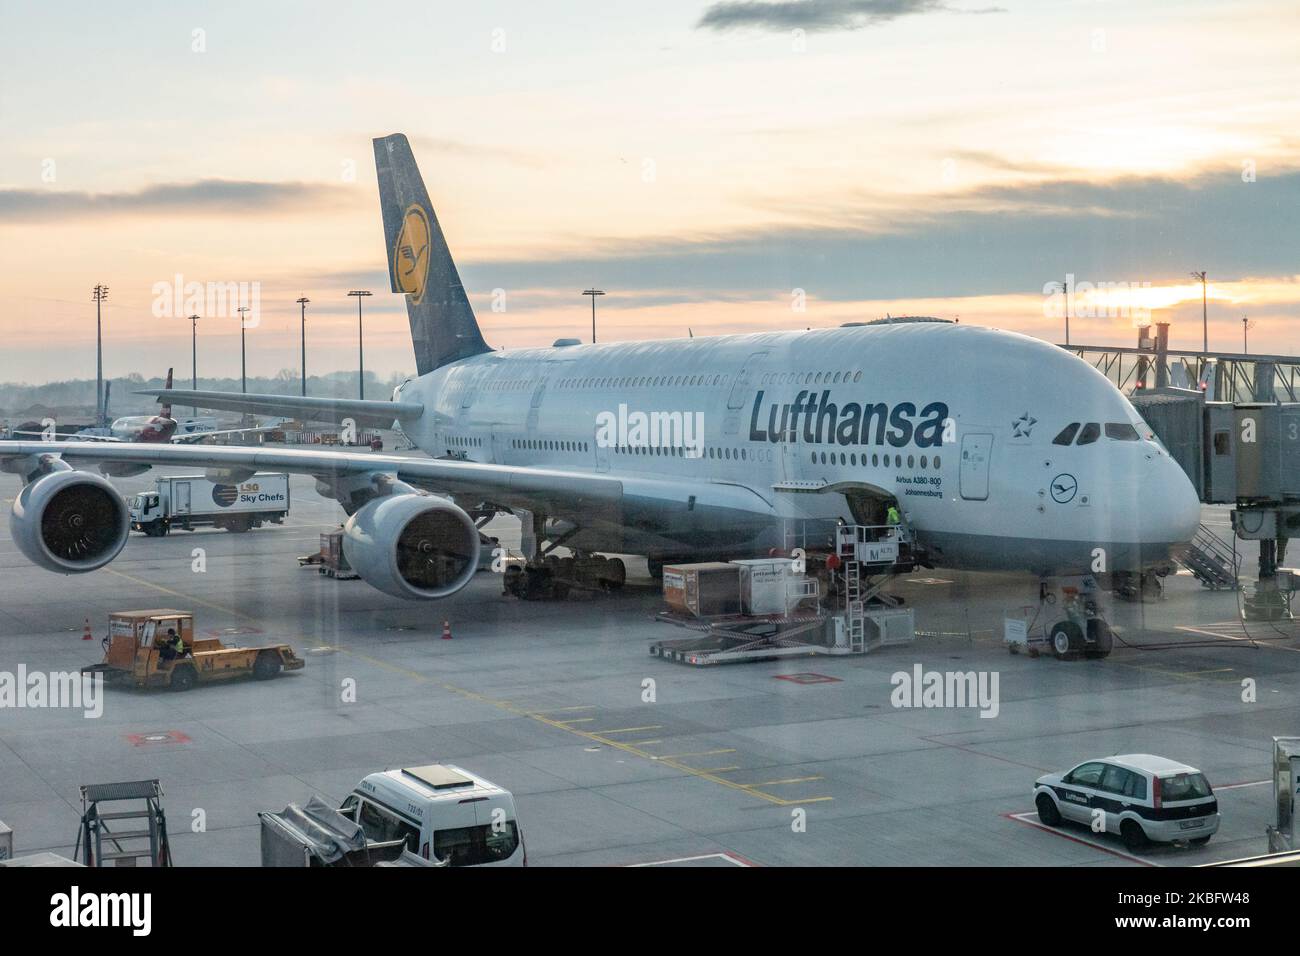 A double decker Airbus A380 aircraft with registration D-AIME and the name Johannesburg as seem docked at the terminal of Munich Airport read for long haul flight. Early morning airplane traffic movement of Lufthansa aircraft with their logo visible on the tarmac and docked via jetbridge or air bridge at the terminal at Munich MUC EDDM international airport in Bavaria, Germany, Flughafen München in German. Deutsche Lufthansa DLH LH is the flag carrier and largest airline in Germany using Munich as one of their two hubs. Lufthansa is a Star Alliance aviation alliance member. January 26, 2020 (P Stock Photo